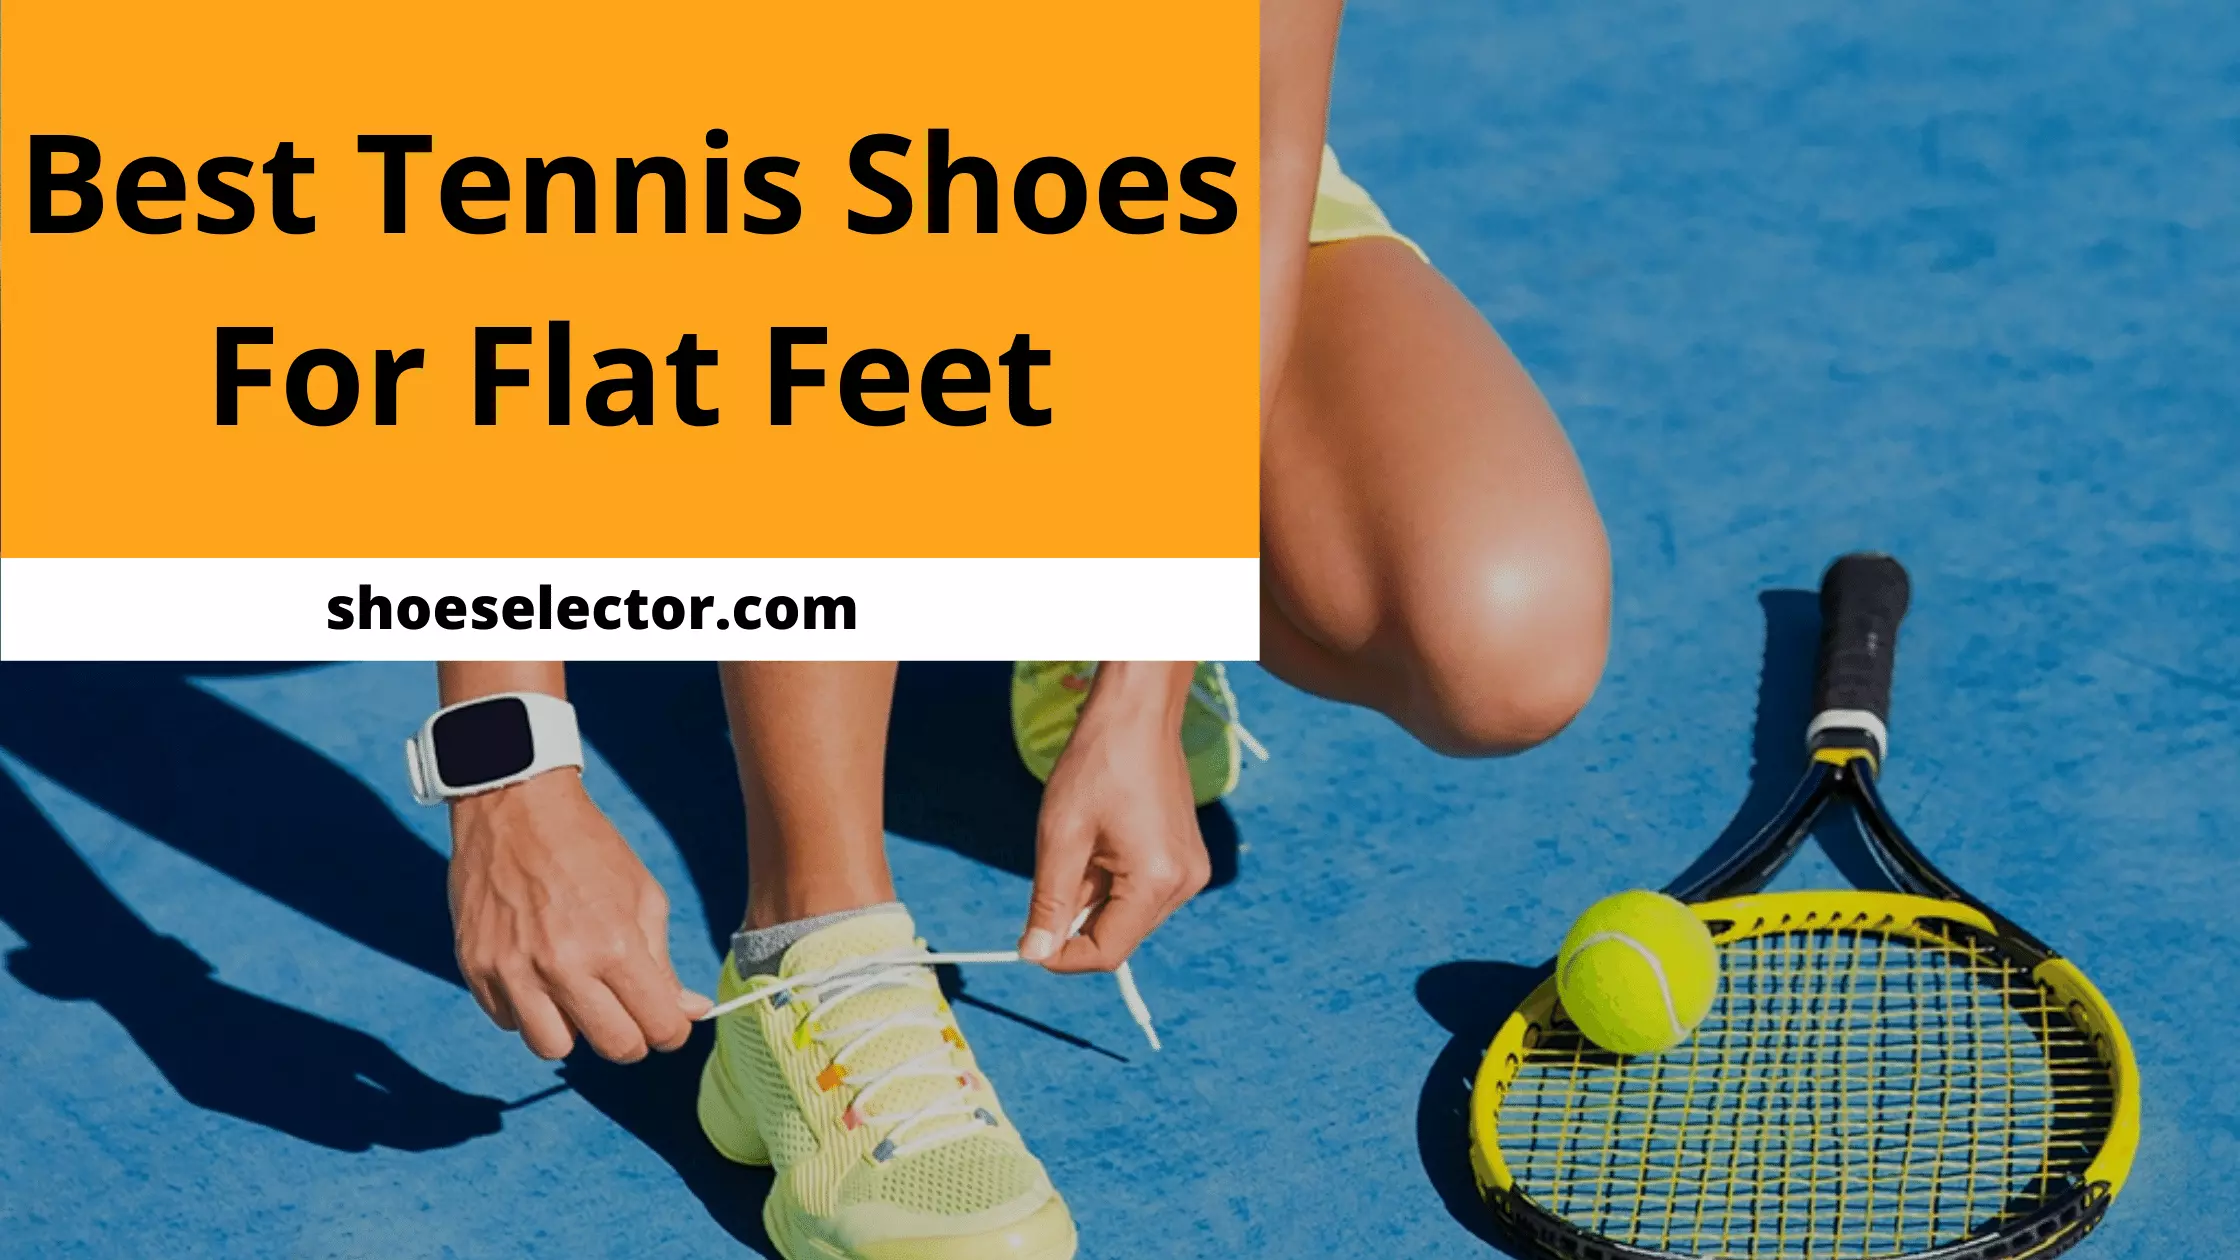 Best Tennis Shoes For Flat Feet - Recommended Guide